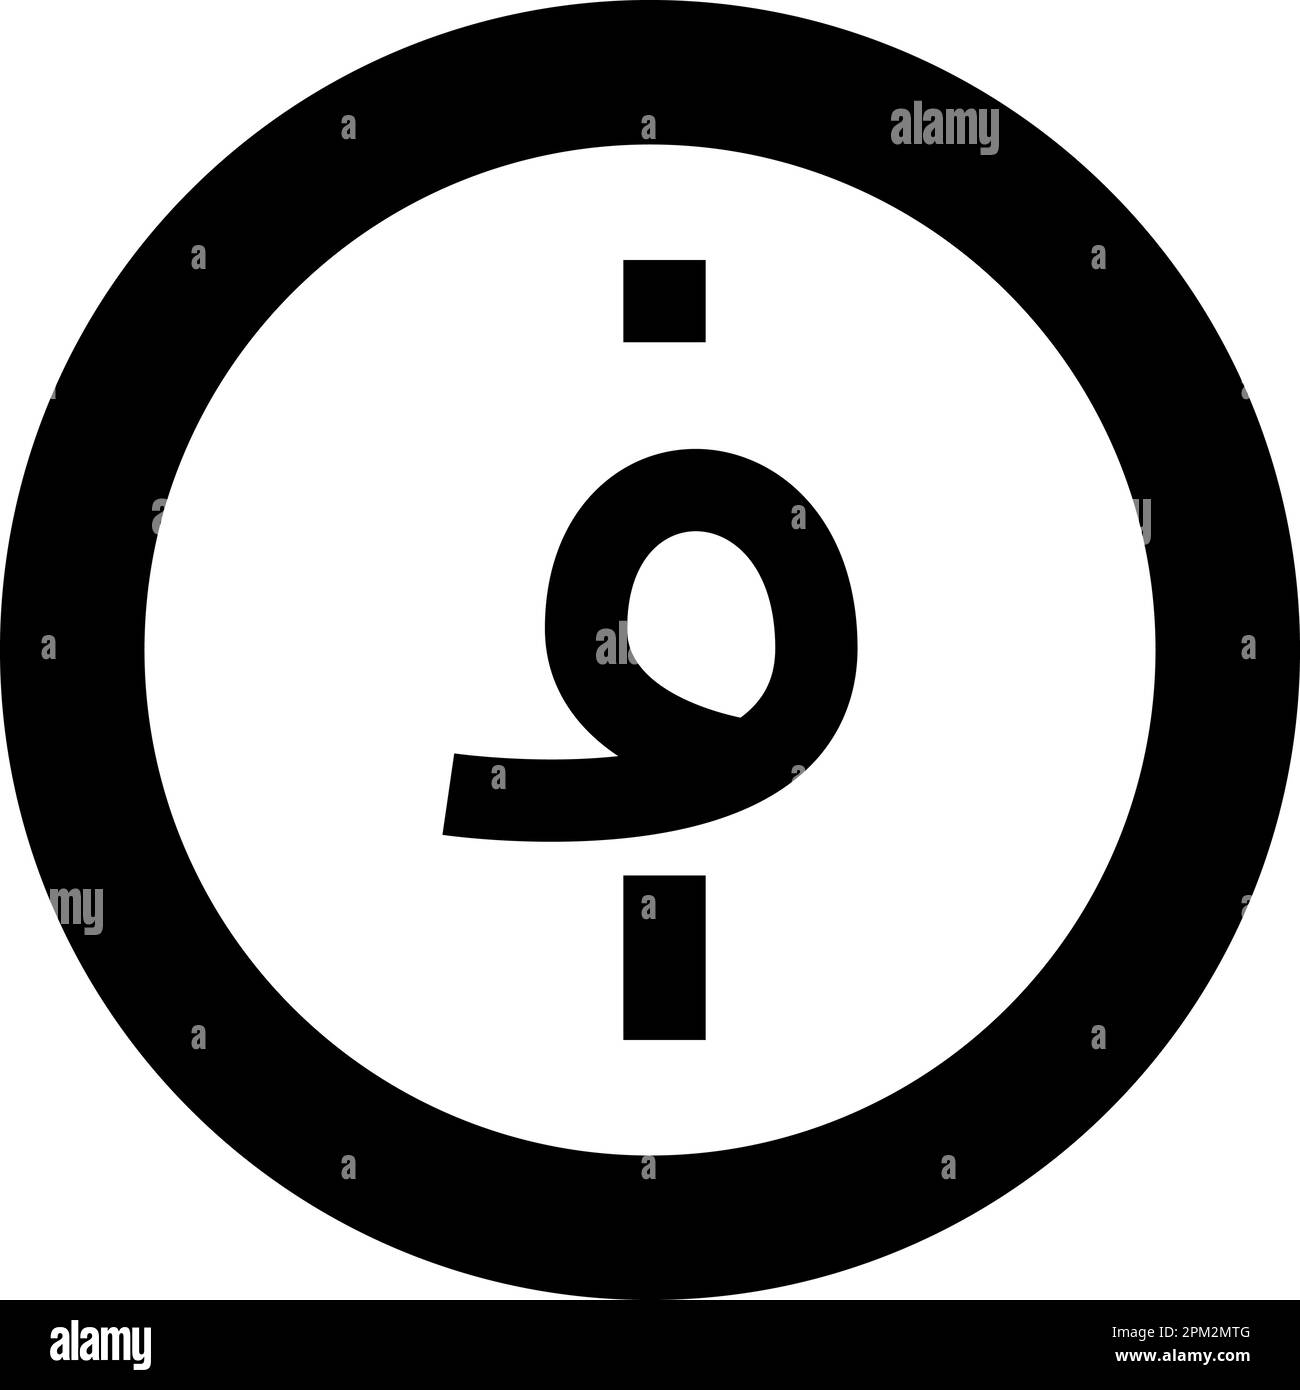 Afghani currency symbol Afghan Afghani AFN sign money icon in circle round black color vector illustration image solid outline style simple Stock Vector